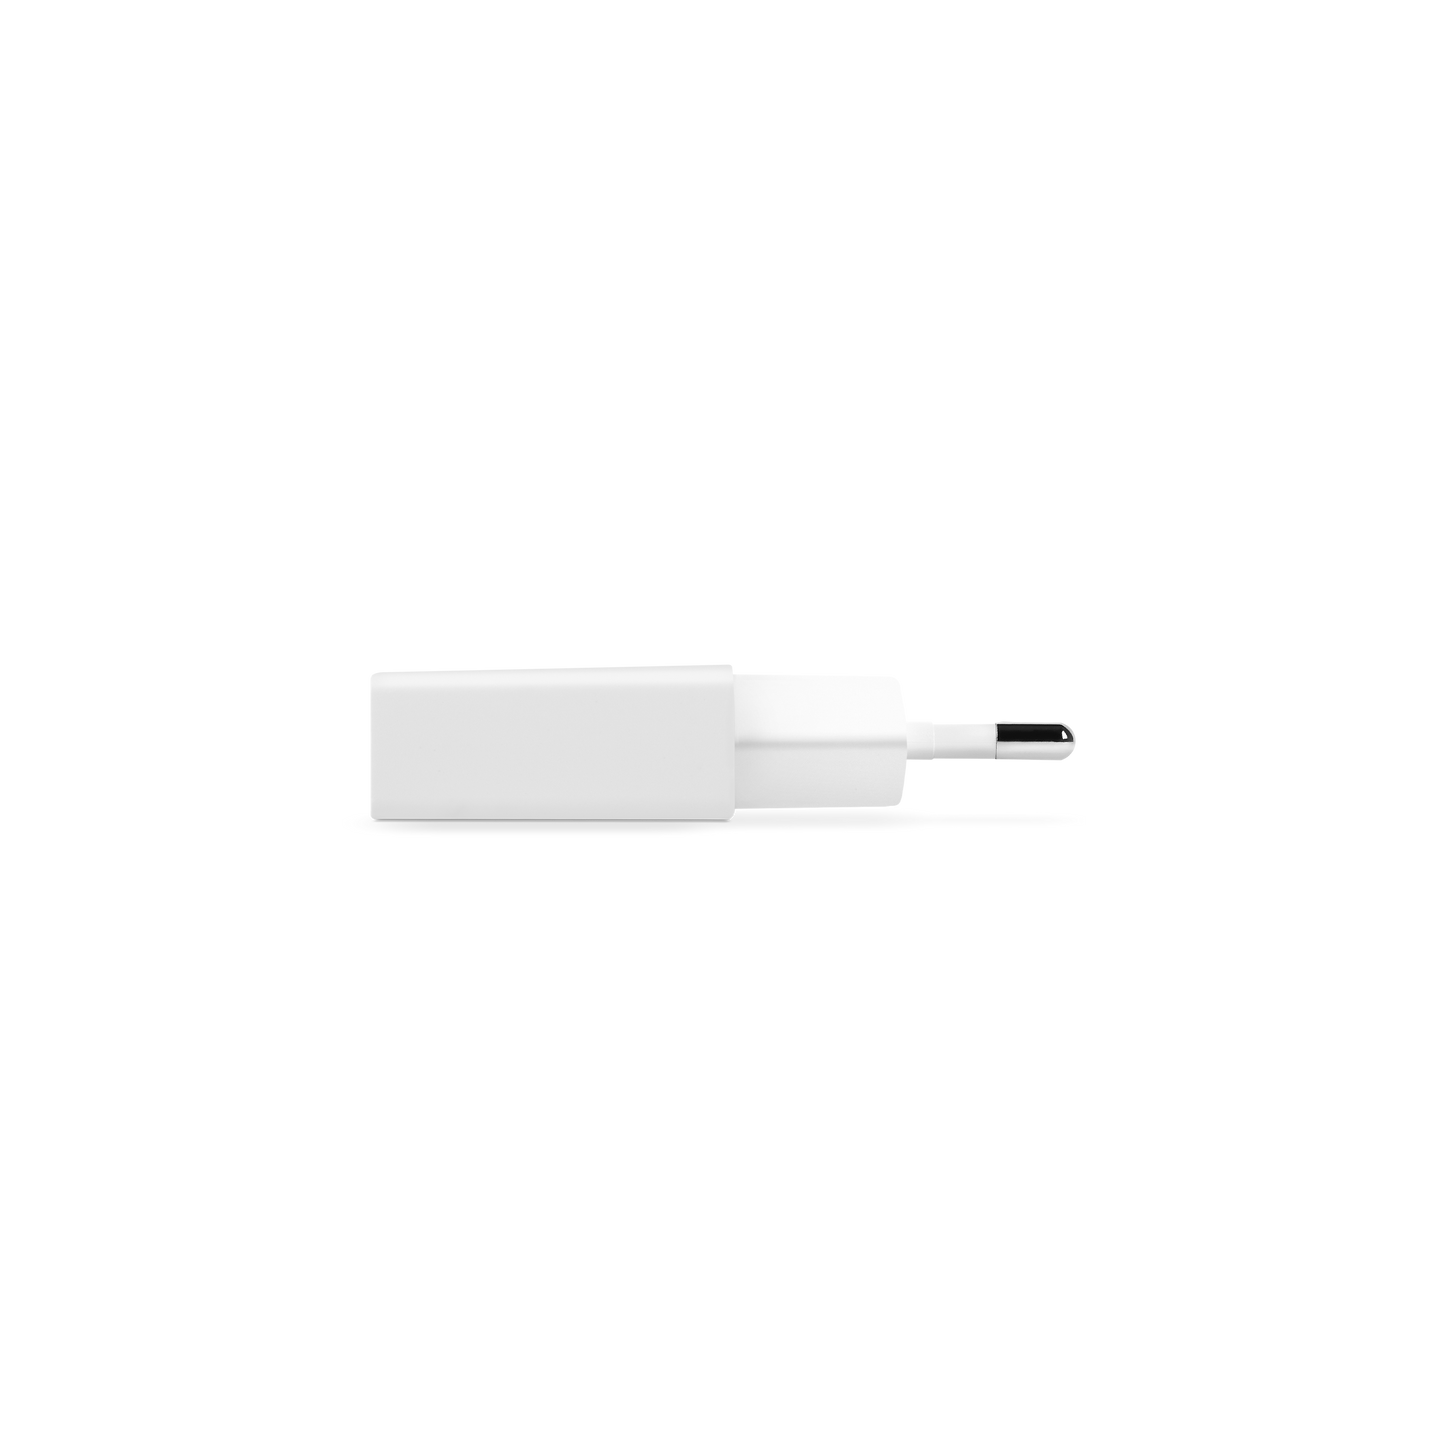 ttec - SmartCharger Travel Charger | USB-A 2.1A | White